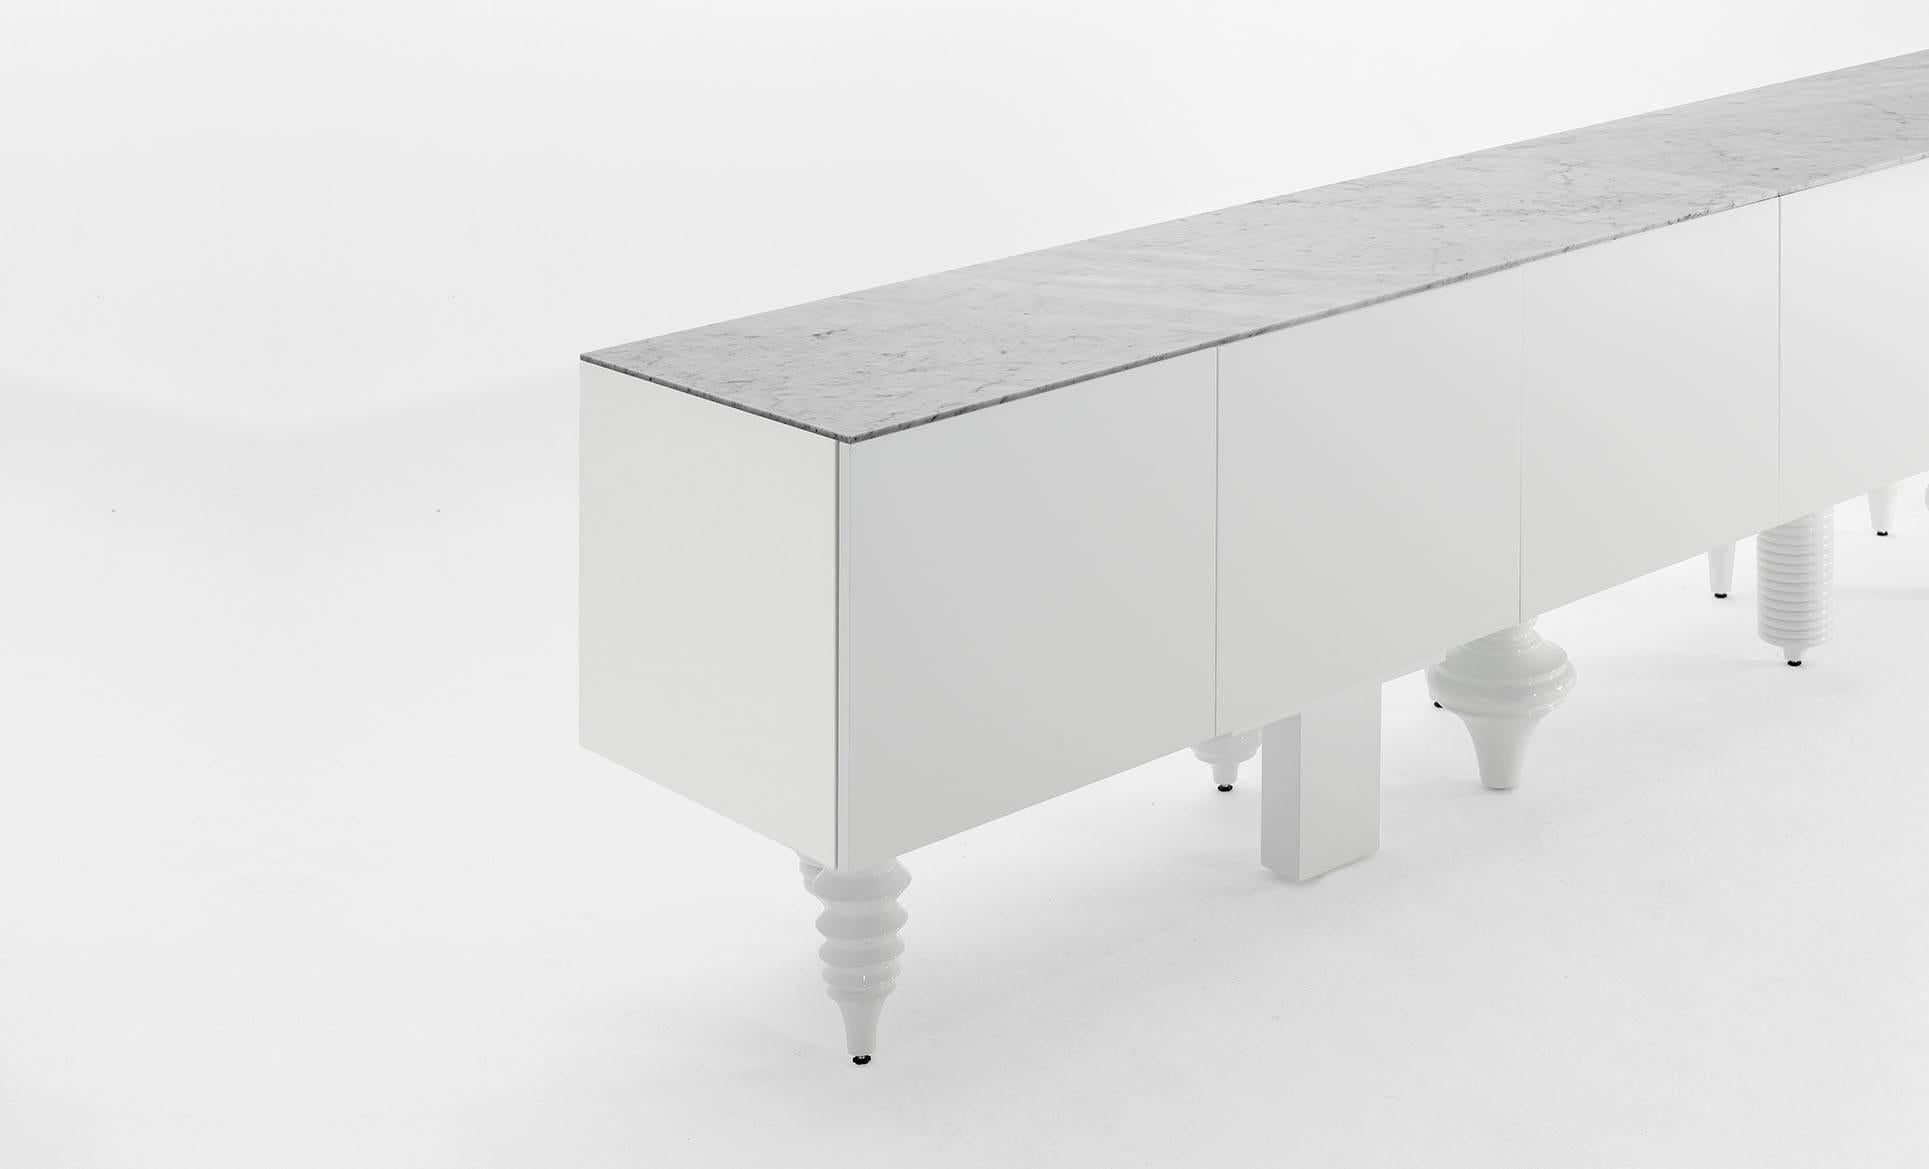 Jaime Hayon cabinet white multileg cabinet designed in 2016 and manufactured by BD Barcelona.

A modular multipurpose and multi-legged furniture. It is available with a dozen different designs inspired by different styles. It allows various